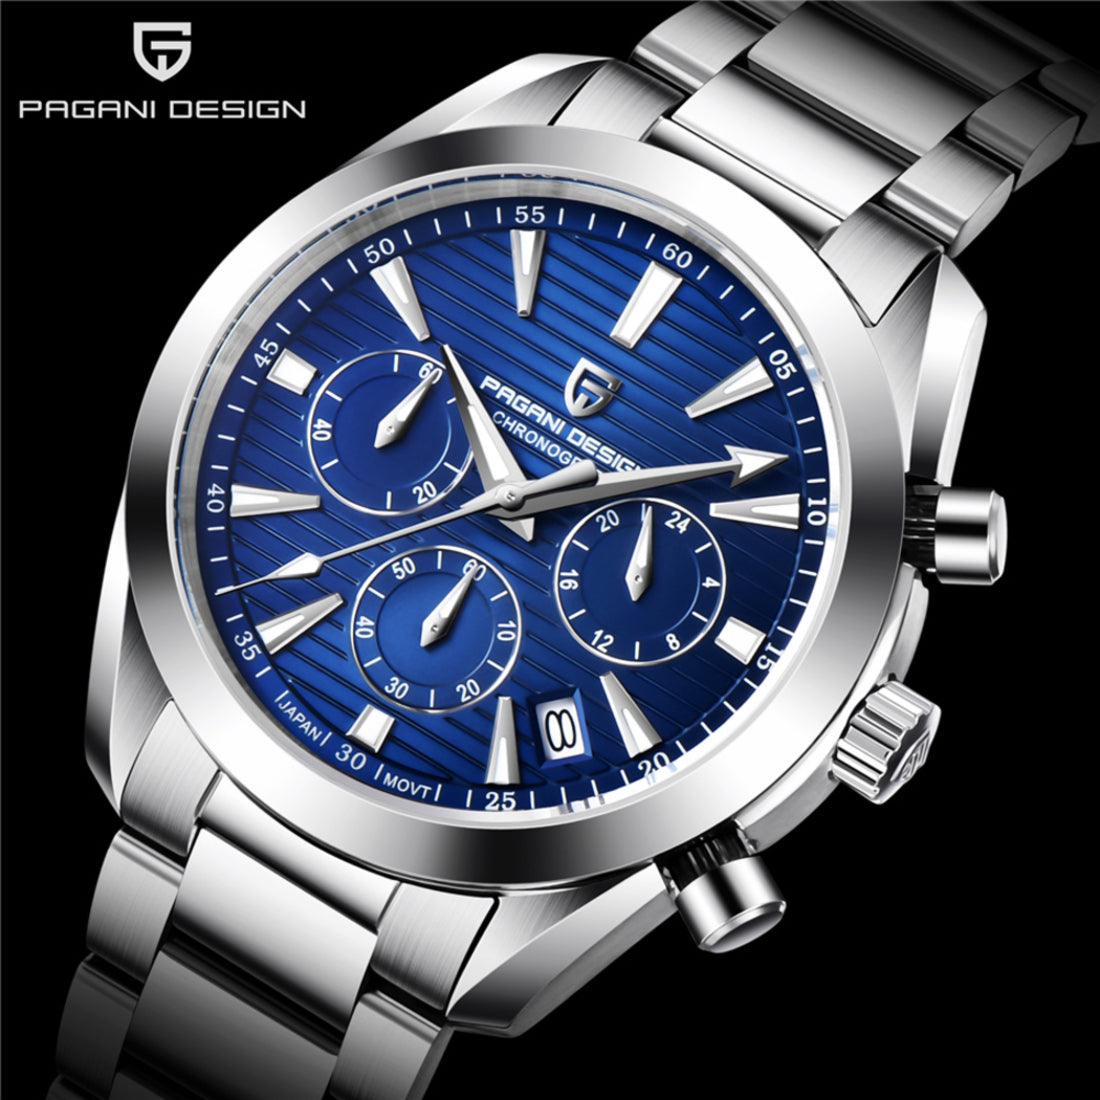 Pagani Design PD-1712 Chronograph Luxury Waterproof Stainless Steel Men's Watch 40MM Watch (Movement Japanese VK63) Blue Dial - DREAM WATCHES